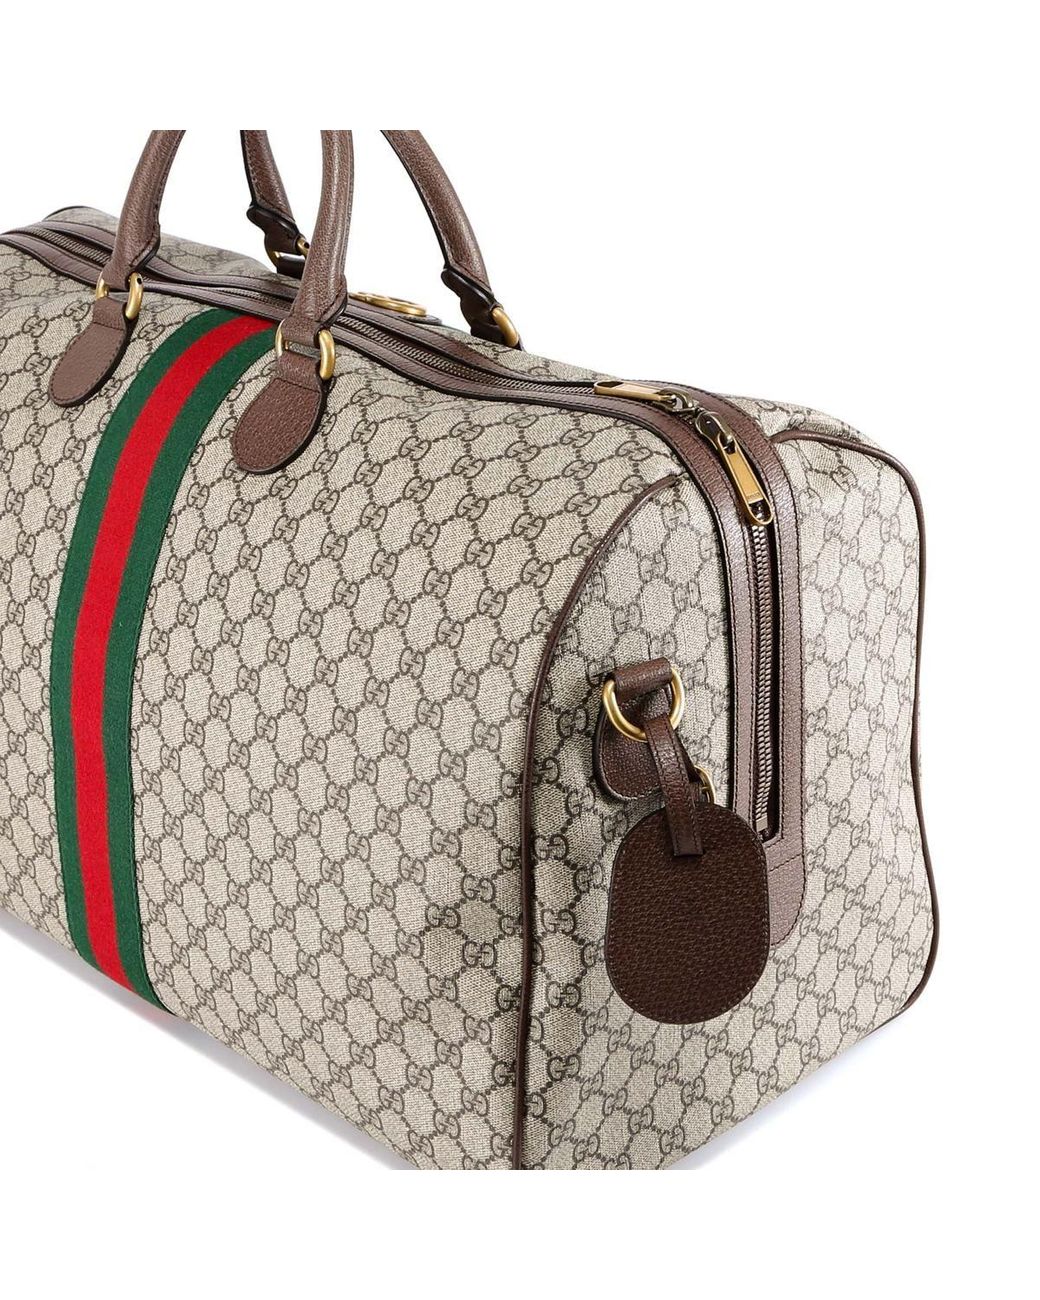 Gucci, Bags, Gucci Savoy Beige And Blue Gg Supreme Canvas Large Duffel Bag